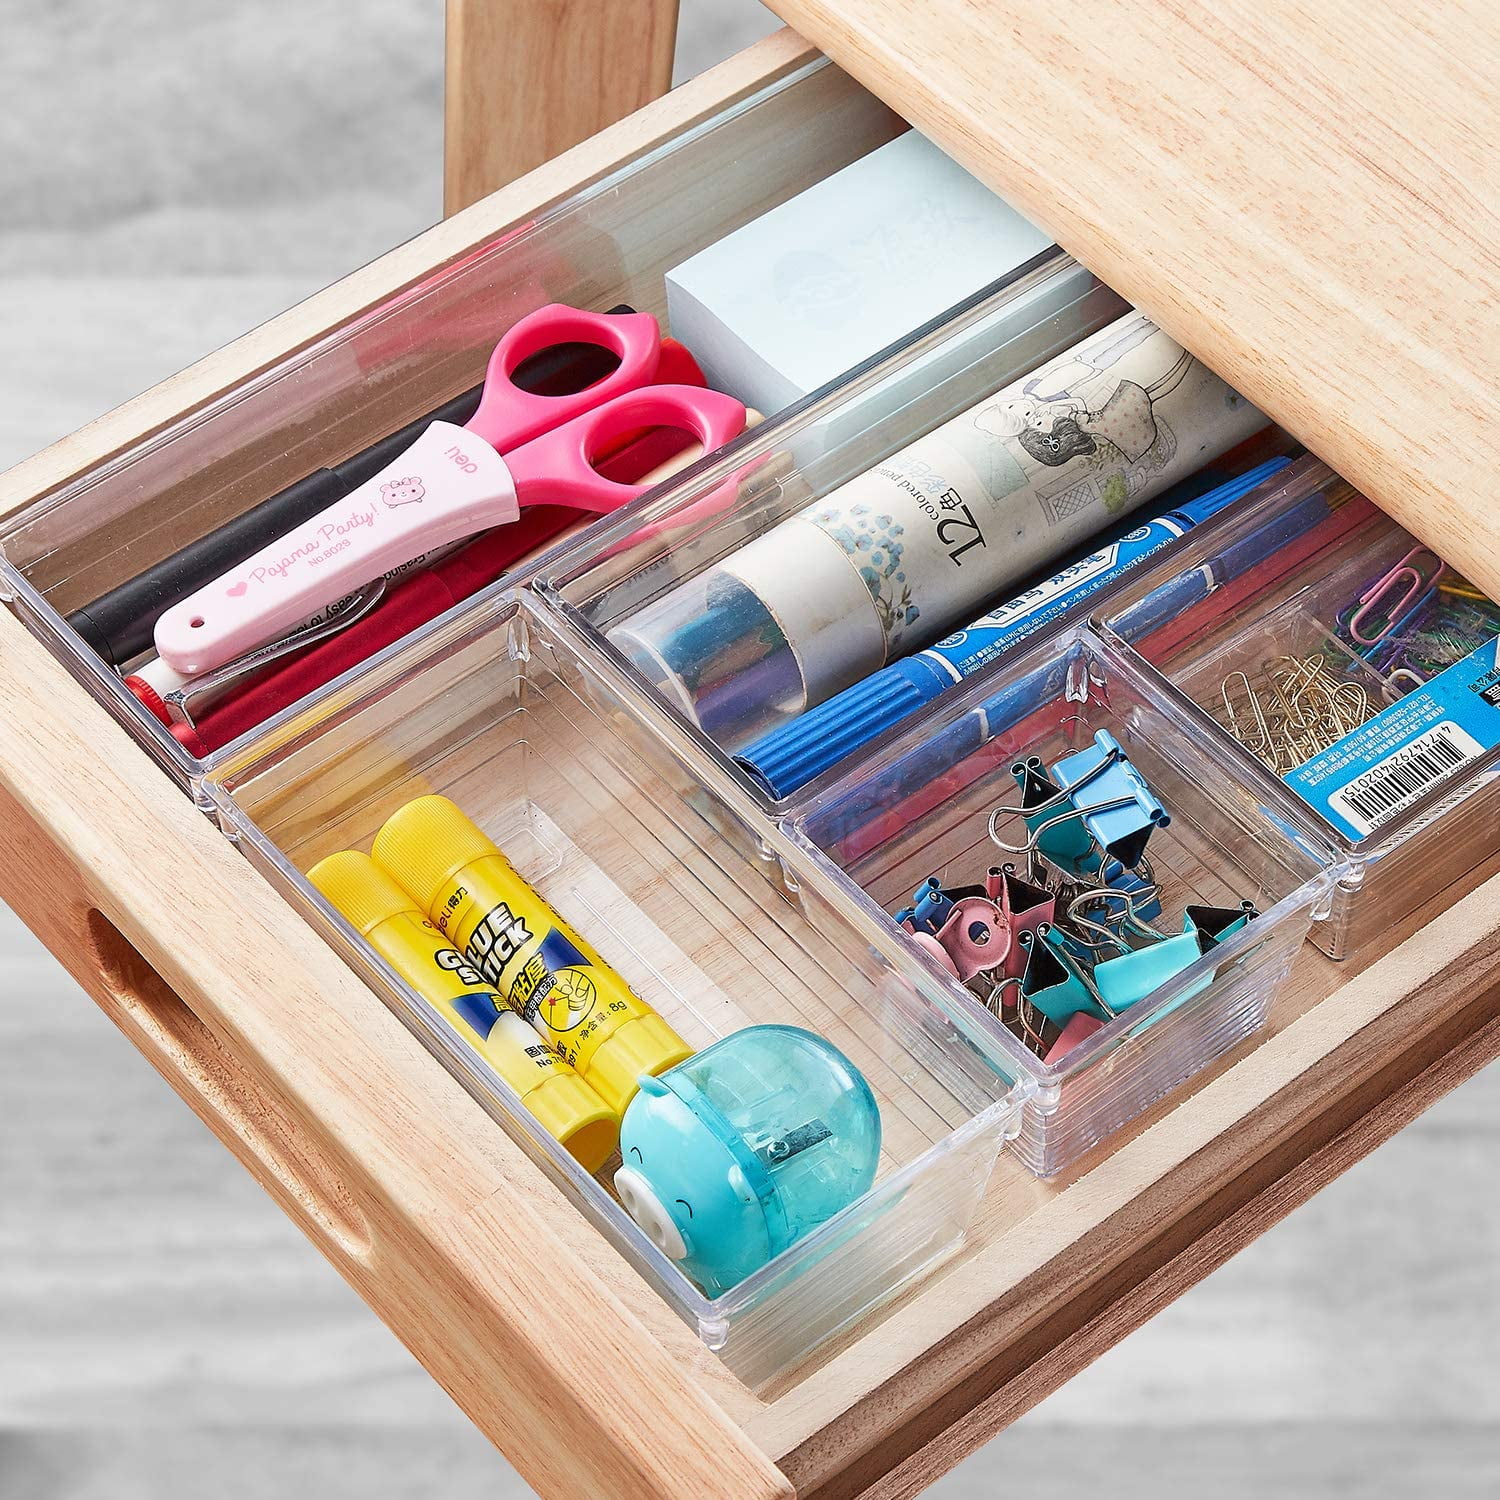 12PCS Stackable Drawer Organizer and Storage, Versatile Large Utensil Tray  Drawer Organizers Bins for Clothes/Kitchen/Bathroom/Office/Makeup, Colorful